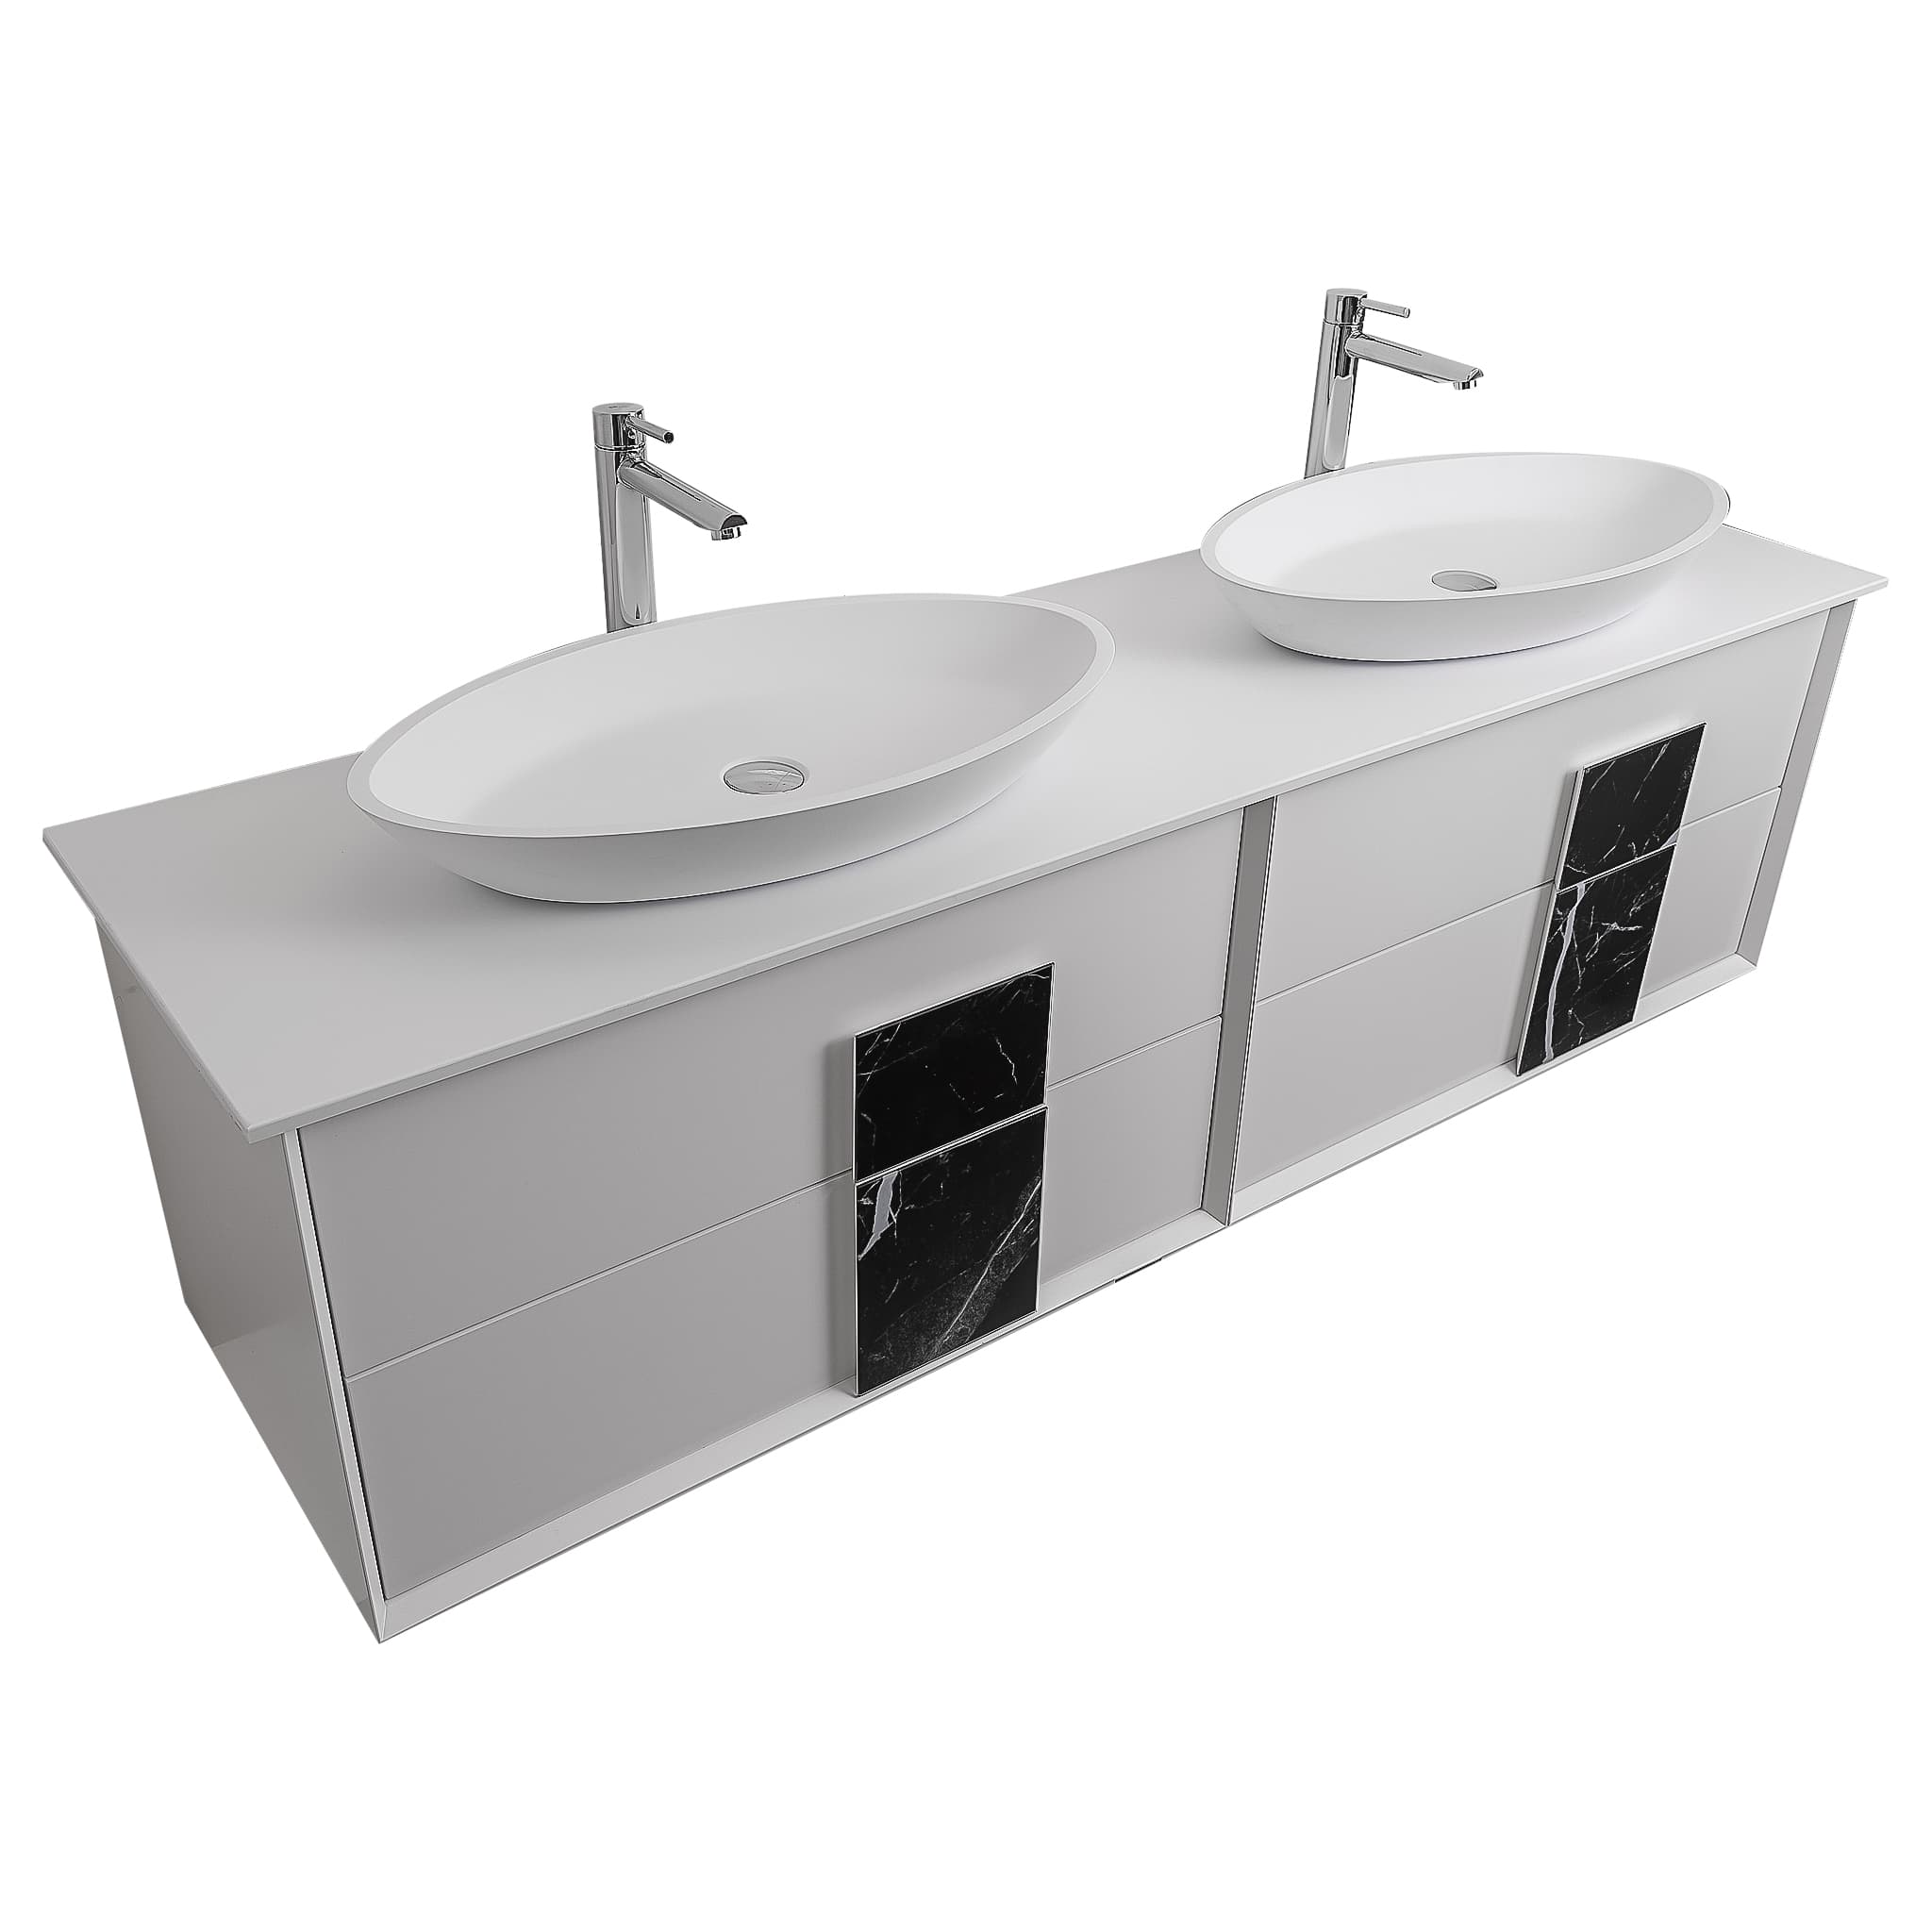 Piazza 63 Matte White With Black Marble Handle Cabinet, Solid Surface Flat White Counter and Two Oval Solid Surface White Basin 1305, Wall Mounted Modern Vanity Set